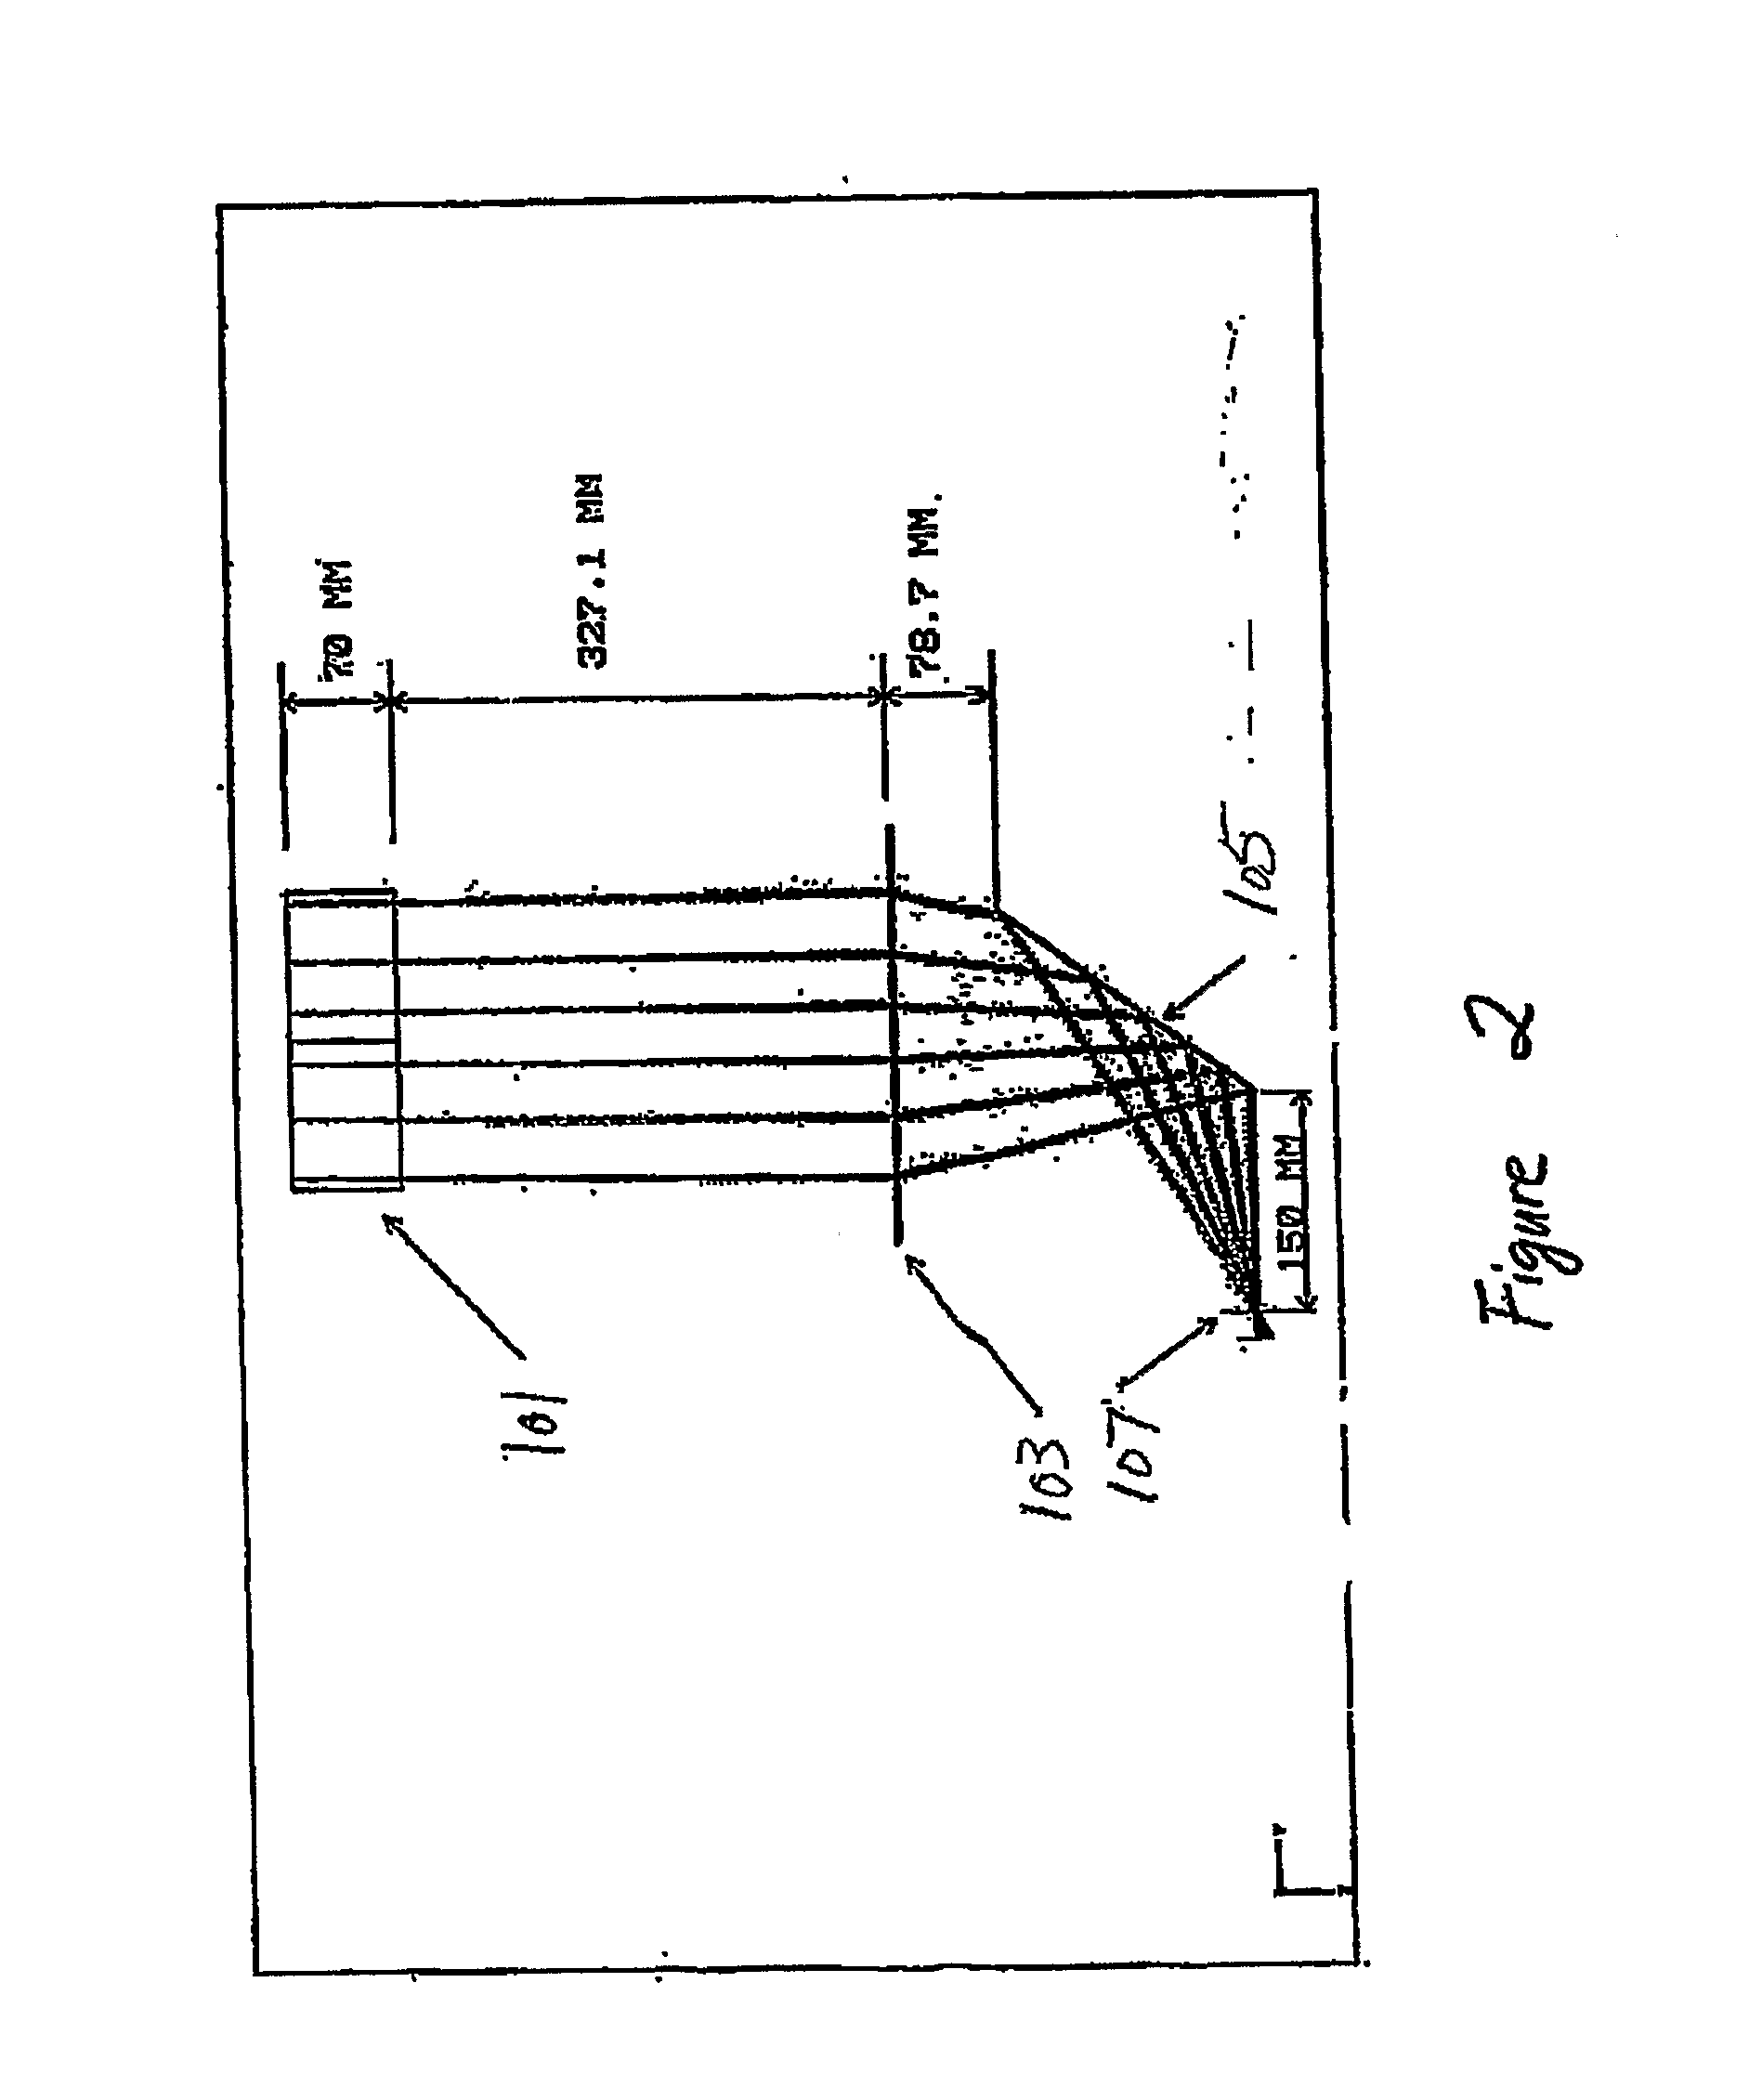 Systems and Methods for Displaying Three-Dimensional Images